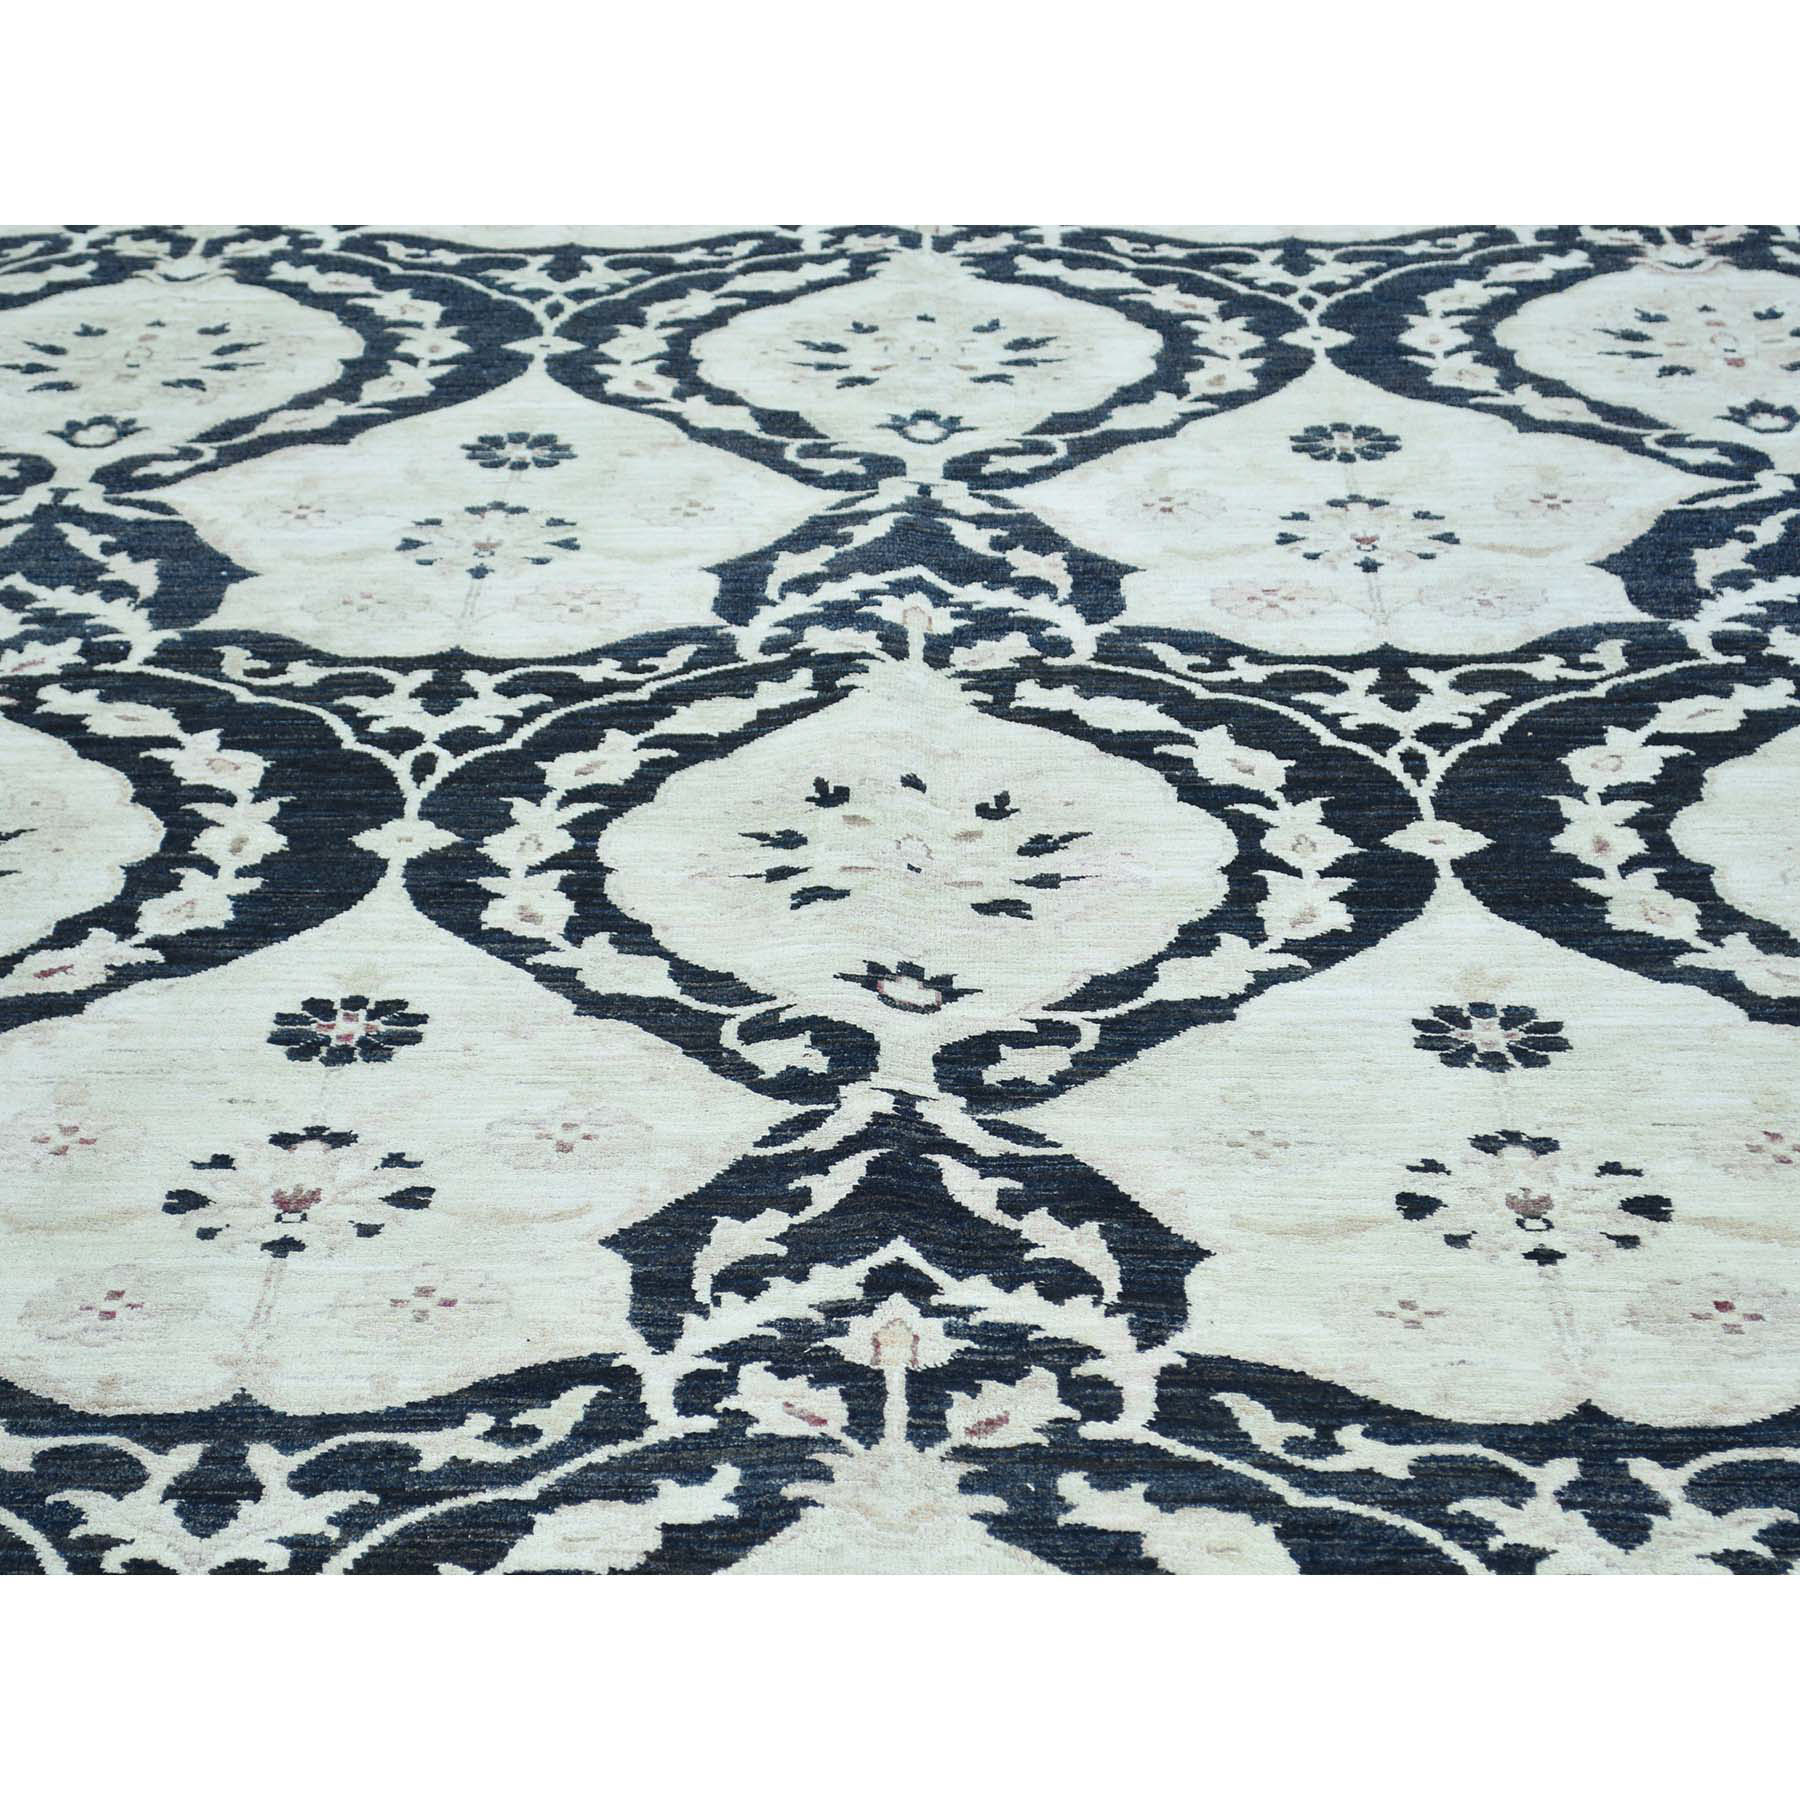 10-x13-8  Hand-Knotted Peshawar With Mughal Design Oriental Rug 